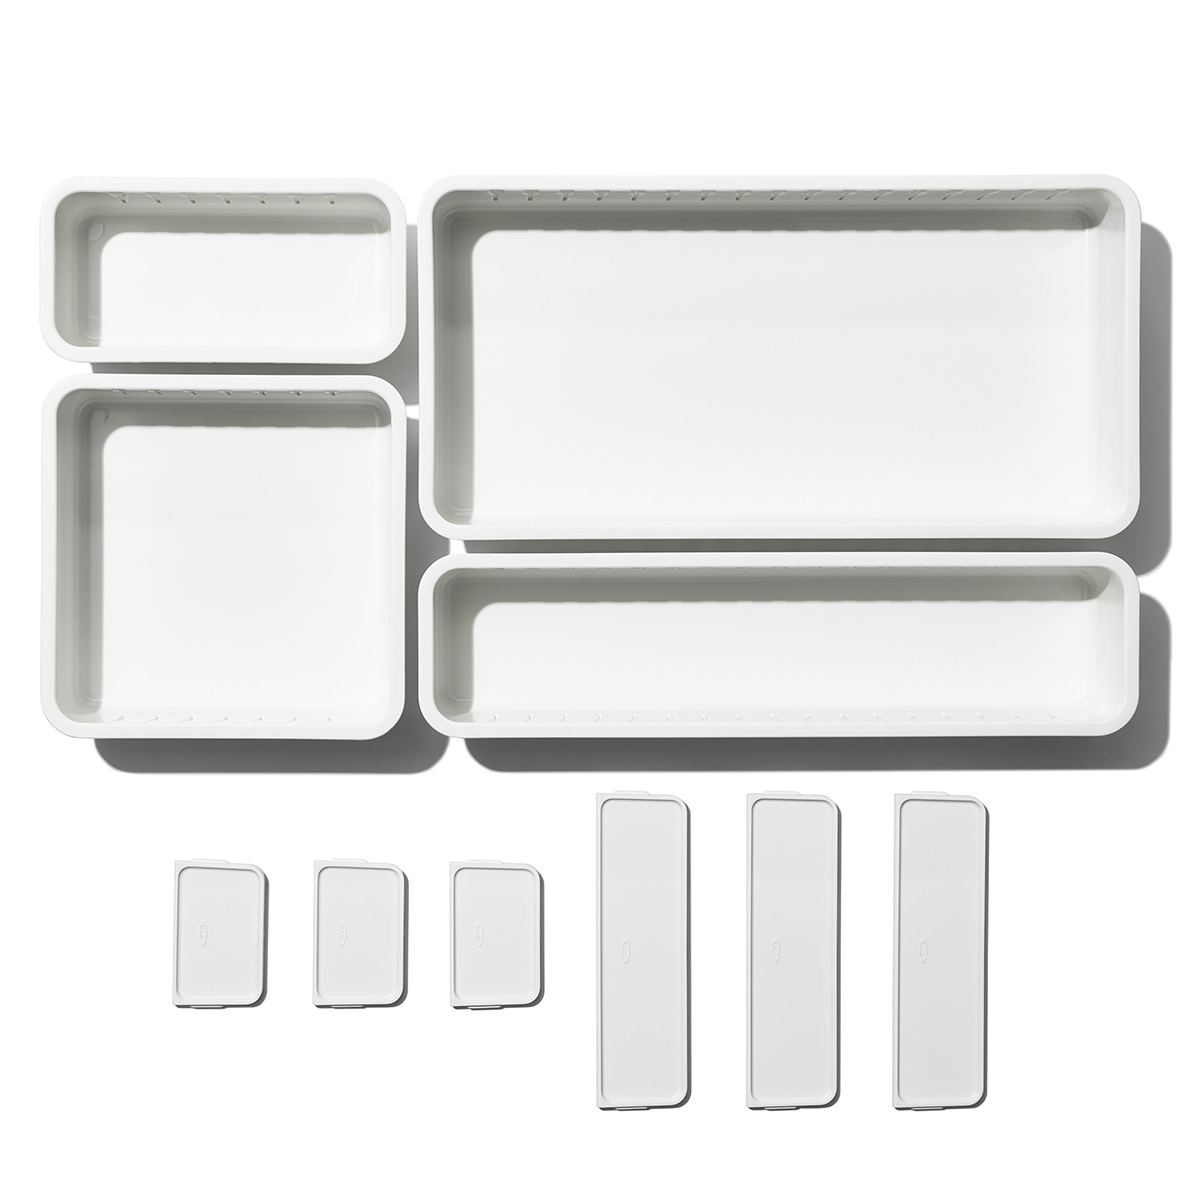 https://www.containerstore.com/catalogimages/444436/10086784-OXO-4-Piece-Set-VEN2.jpg